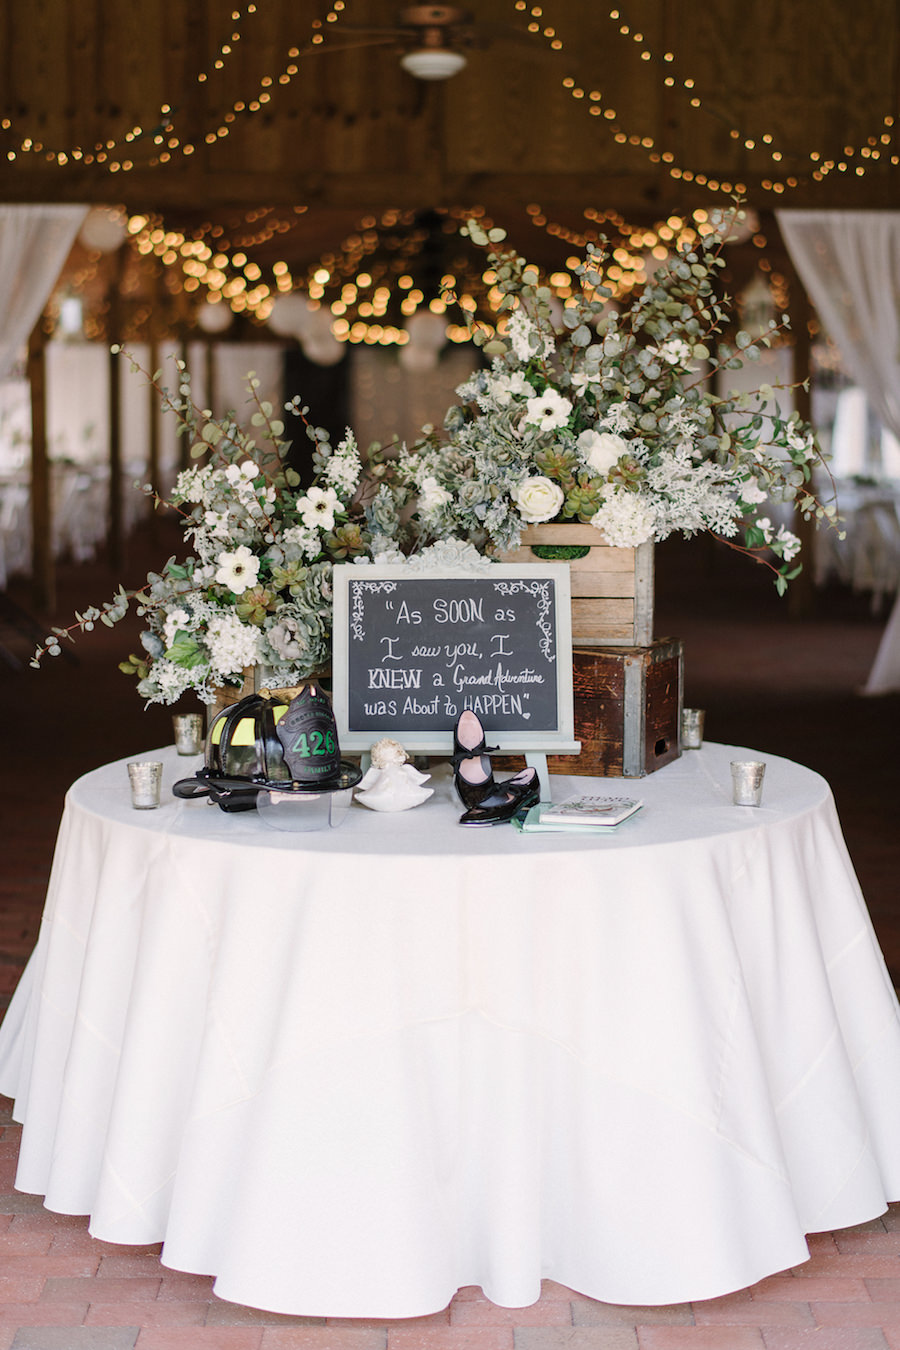 Rustic Wedding Guest Book Table With Ivory Flowers, Eucalyptus, and Dusty Miller Greenery with Chalk Sign and Twinkle Lights at Tampa Bay Wedding Venue Cross Creek Ranch